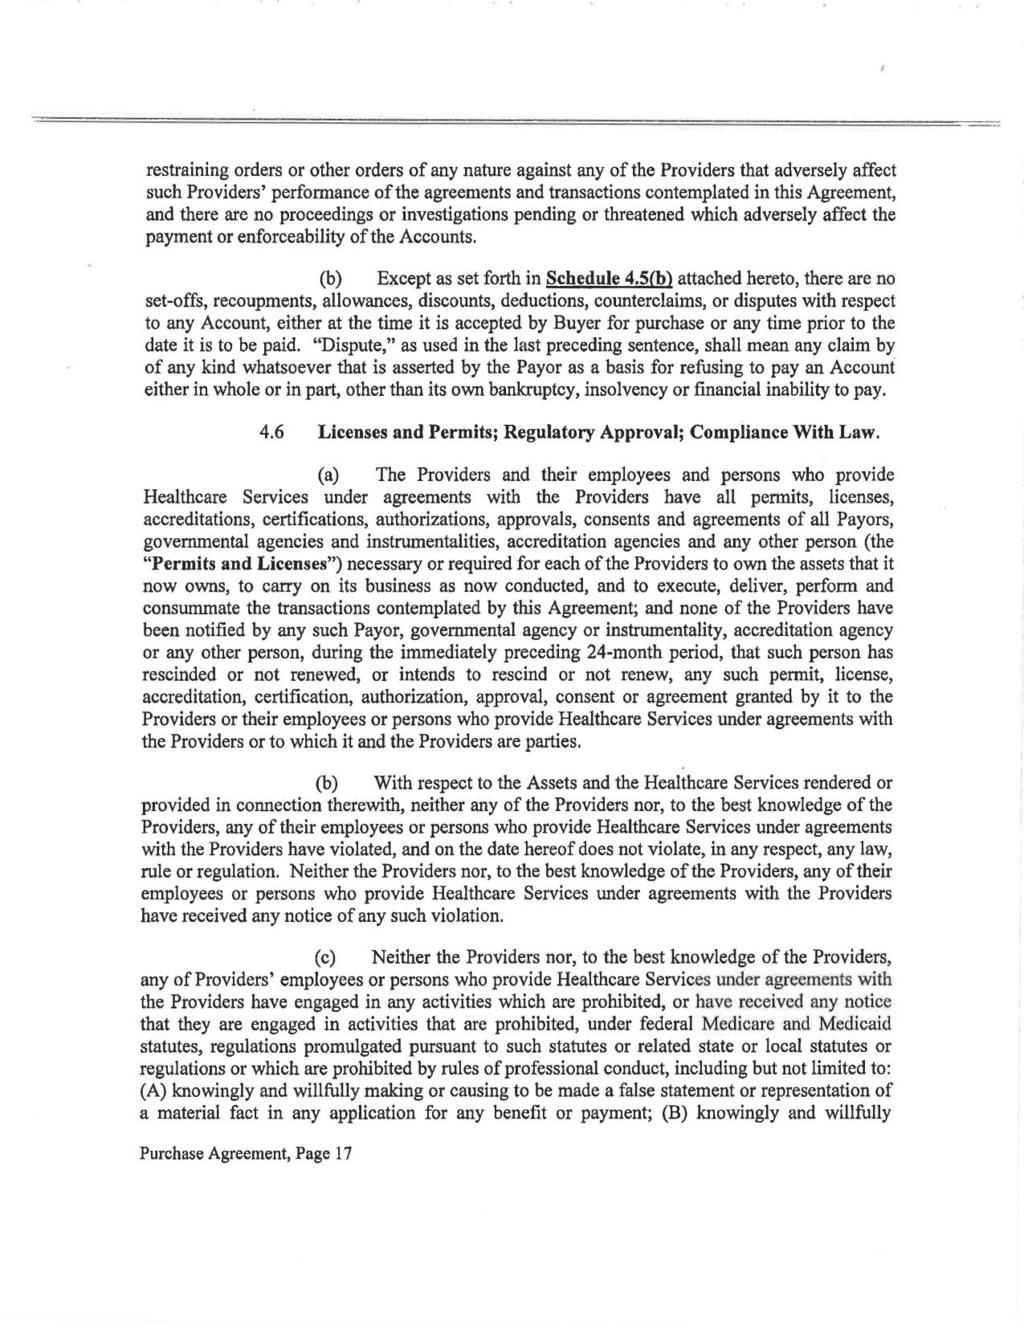 Document Page 65 of 102 restraining orders or other orders of any nature against any of the Providers that adversely affect such Providers' performance of the agreements and transactions contemplated